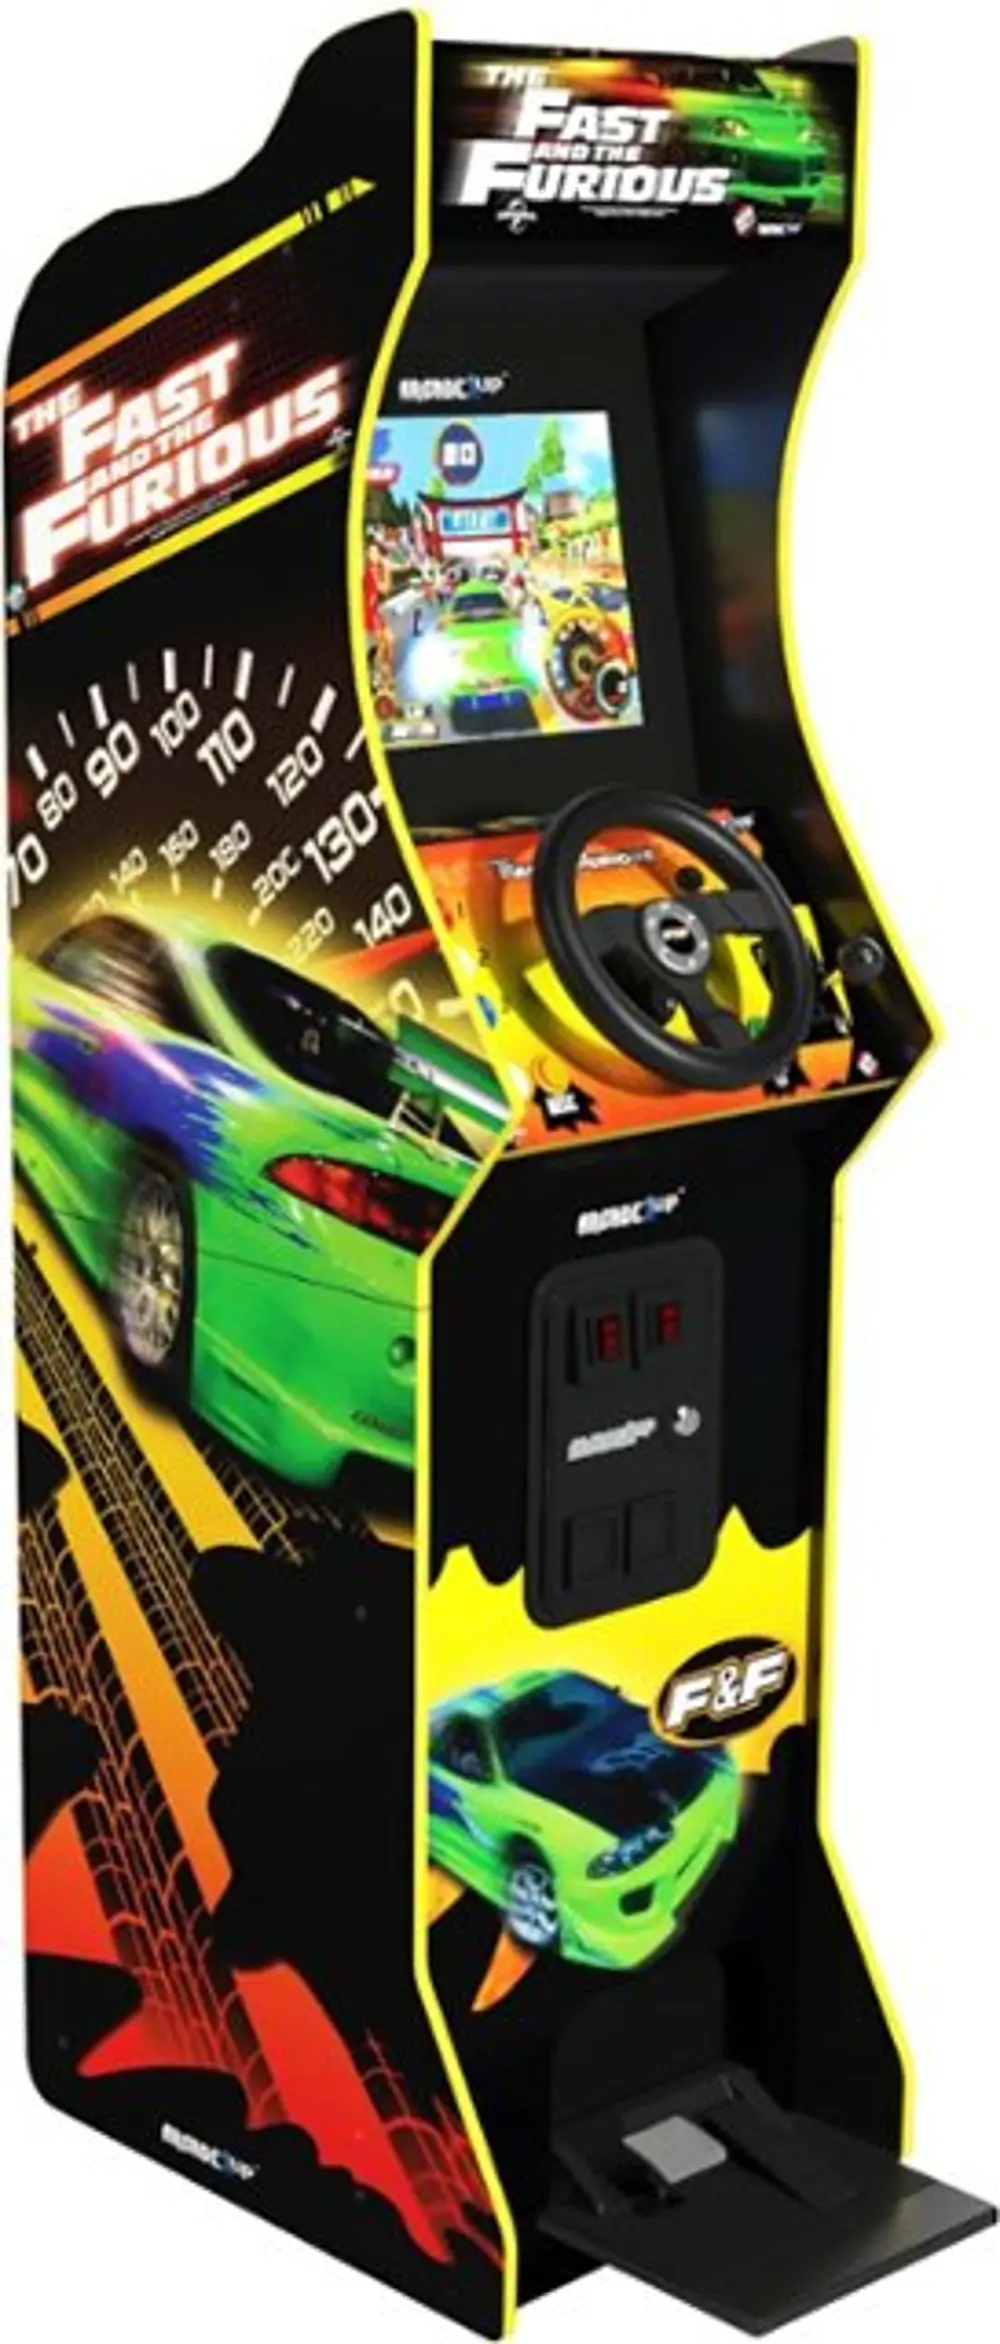 FAF-A-300211 Arcade1Up The Fast & The Furious Deluxe Arcade Game-1